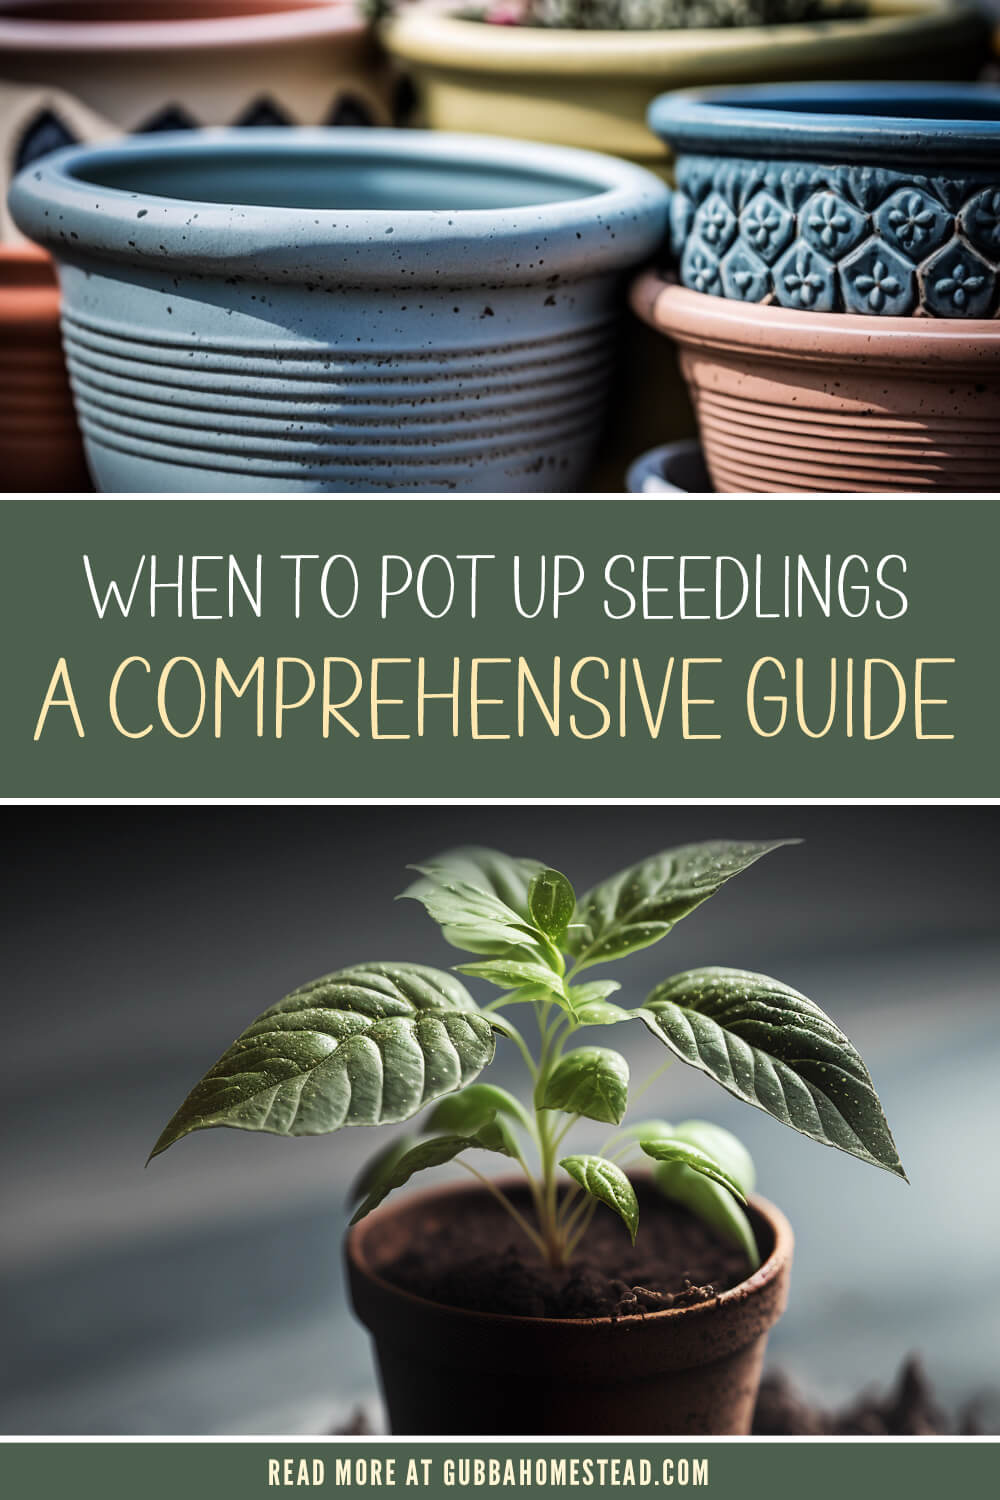 When to Pot Up Seedlings: A Comprehensive Guide for Successful Transplanting